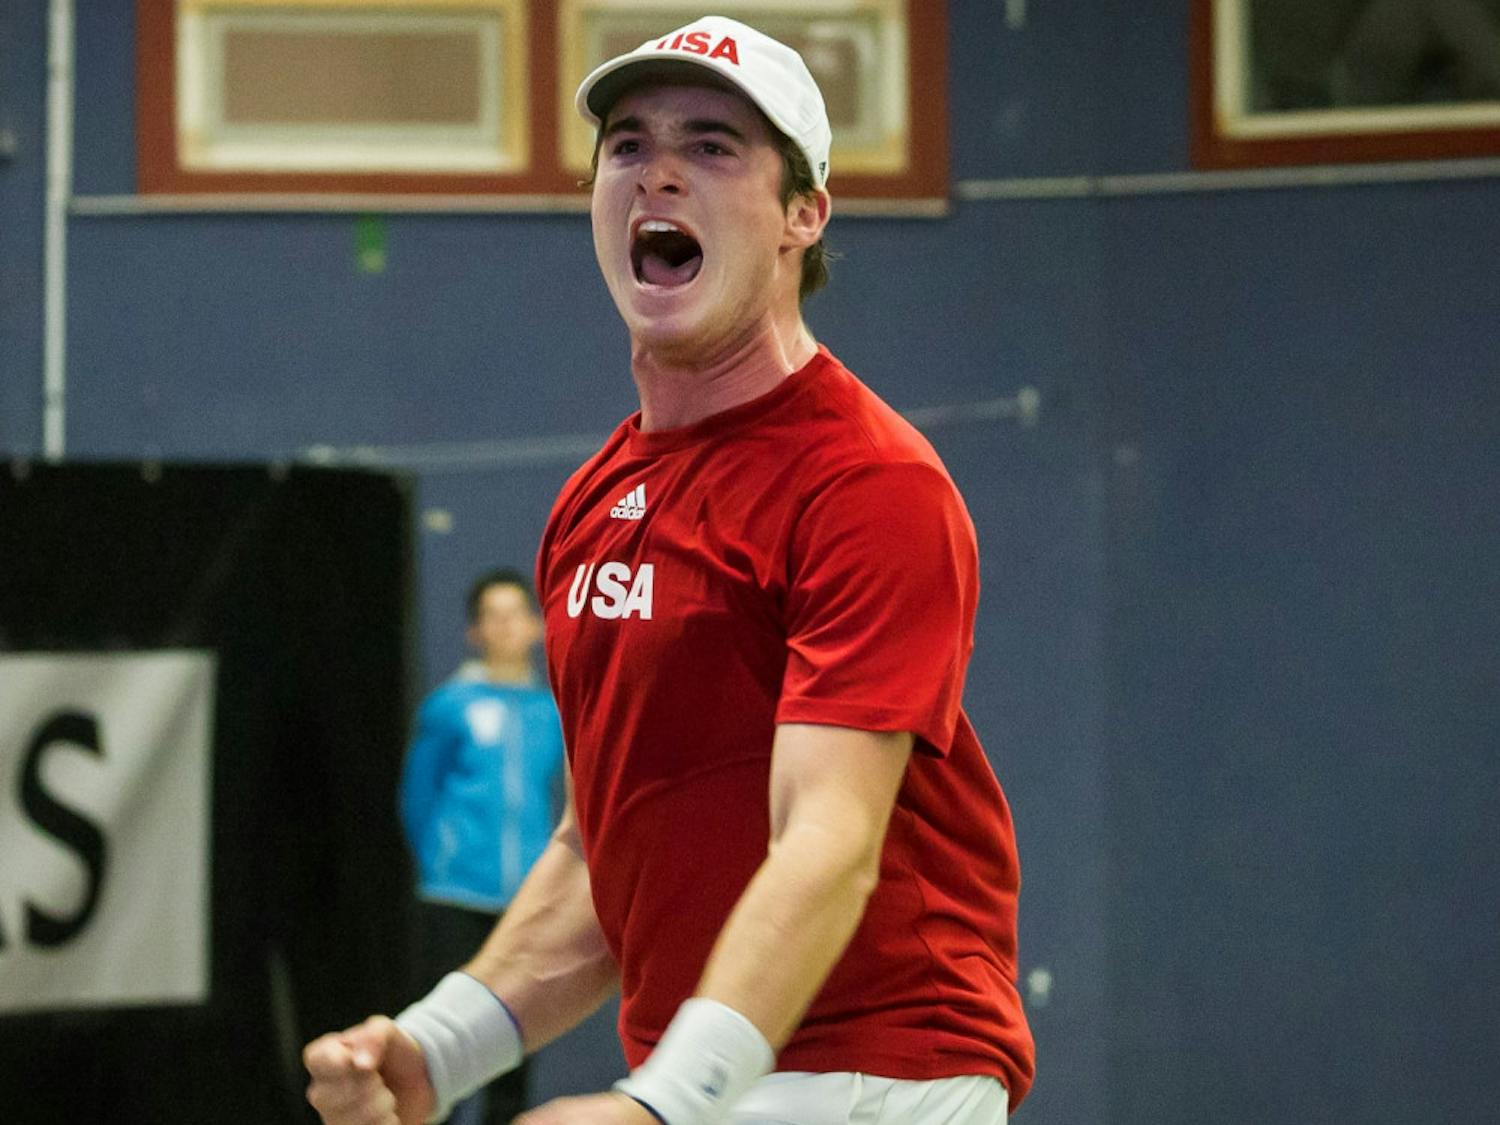 Oliver Crawford helped team USA to a victory at the Master’U Collegiate Tournament to culminate a successful fall season that saw him claim singles titles at the USA F28 Futures and the UVA Masters.